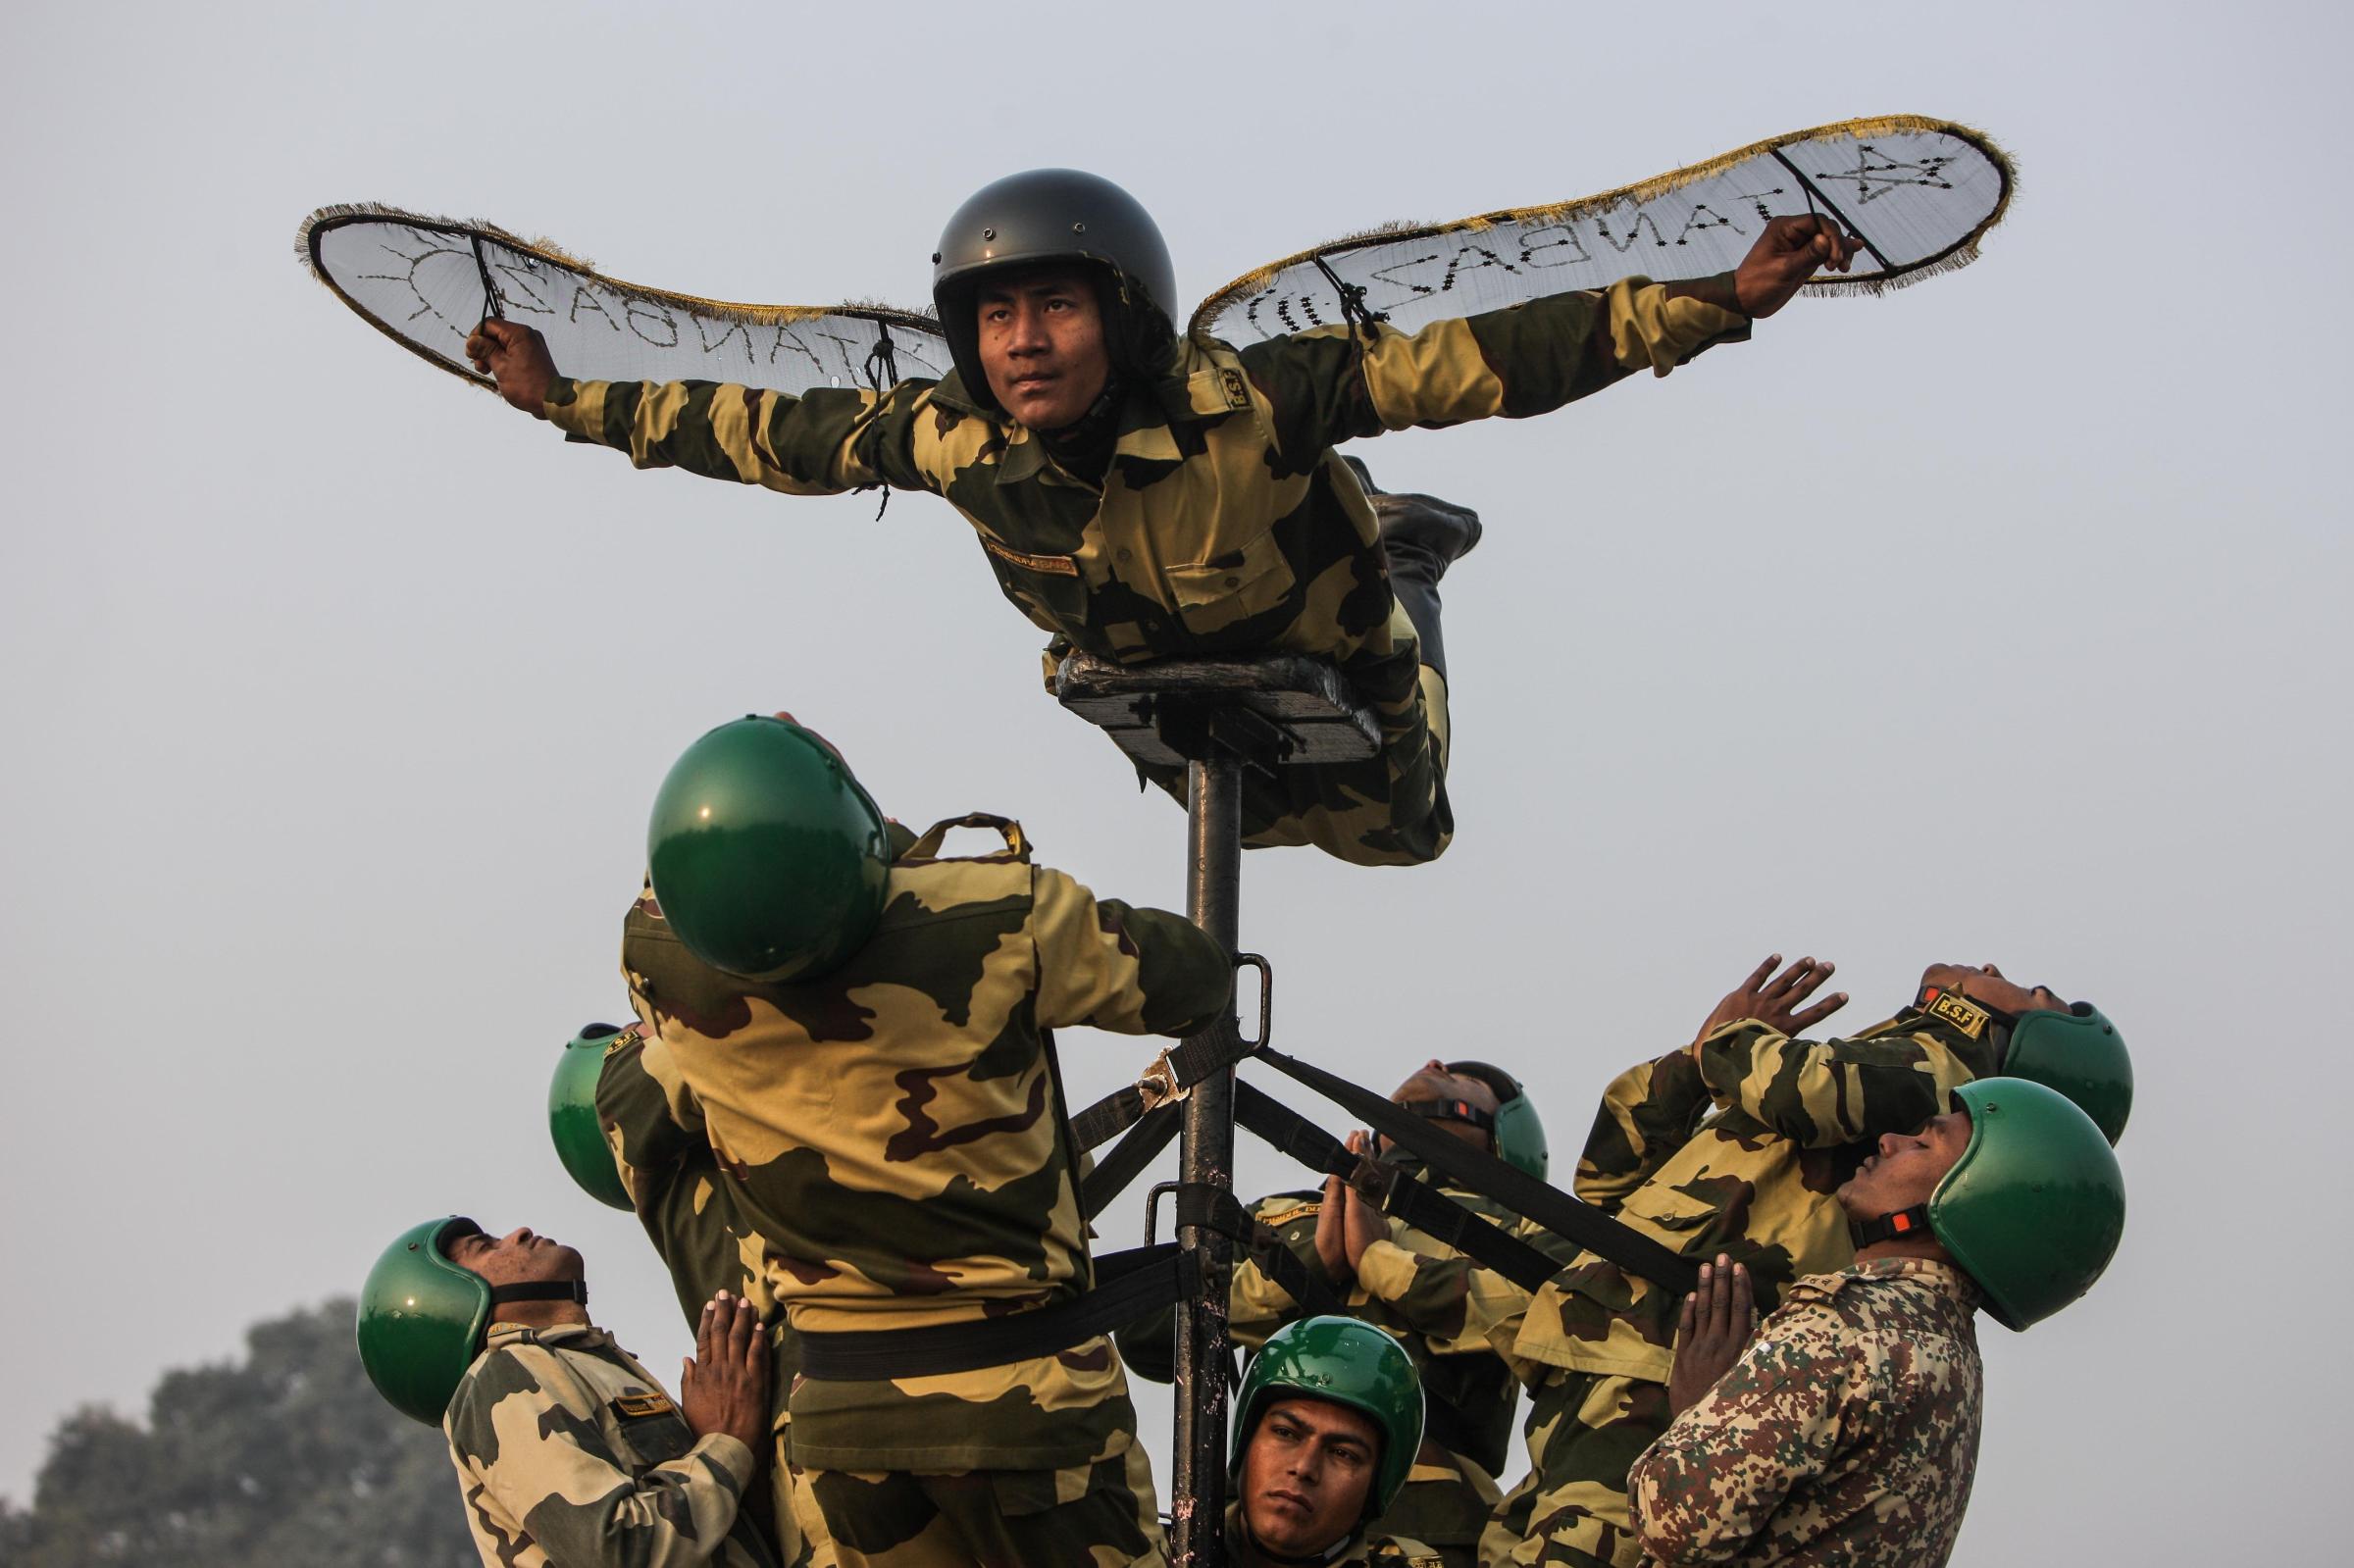 Members of India's Border Security Force rehearse for the Republic Day, 2014, celebrations on Rajpath in New Delhi, India, Jan. 11, 2014.